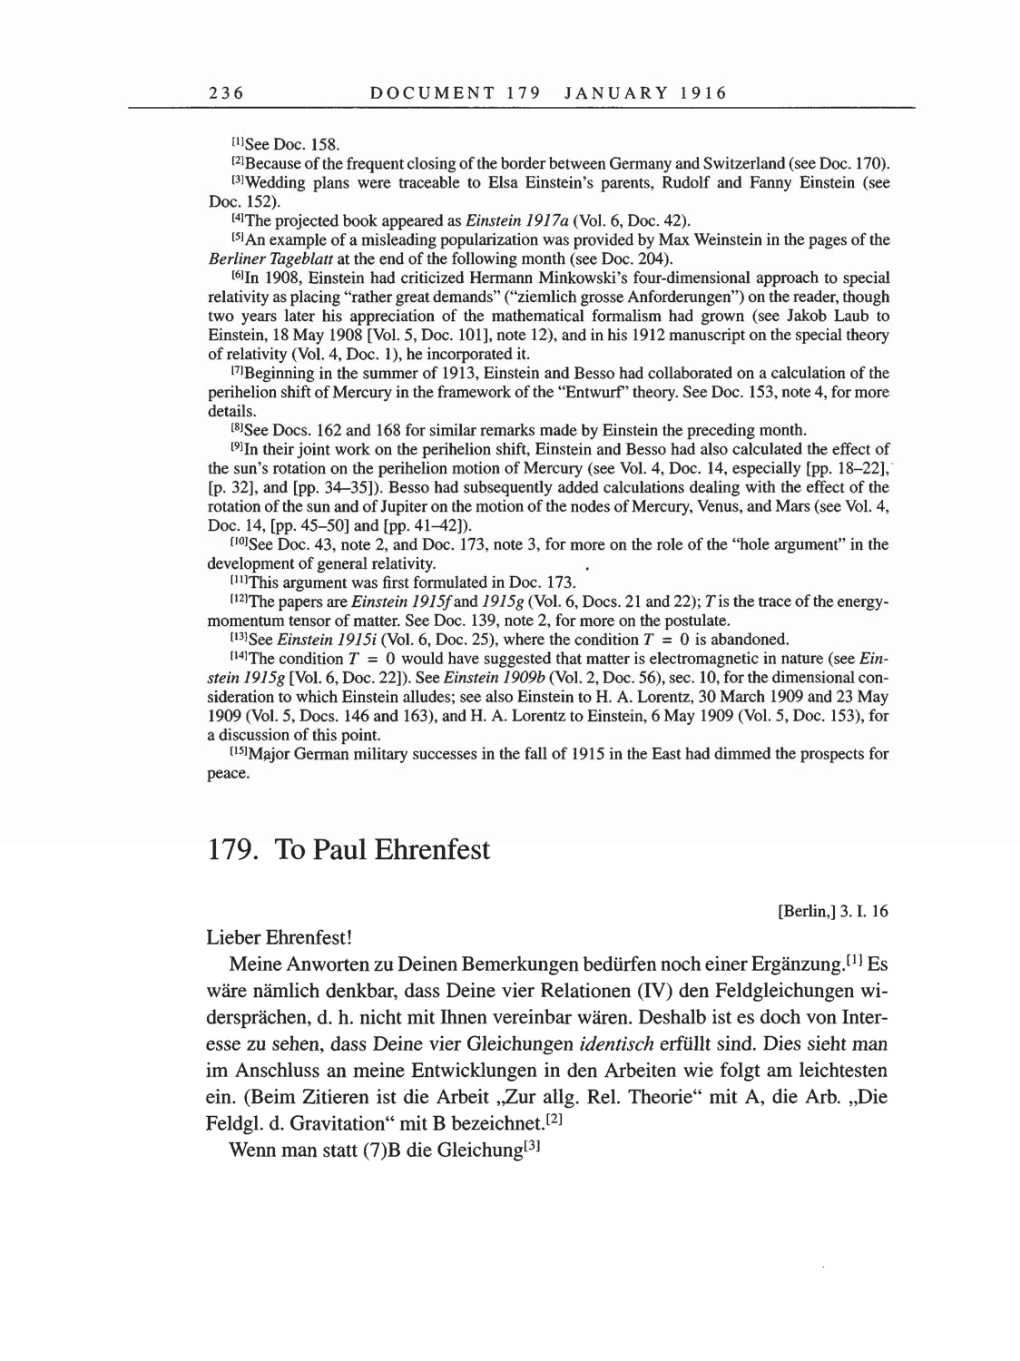 Volume 8, Part A: The Berlin Years: Correspondence 1914-1917 page 236